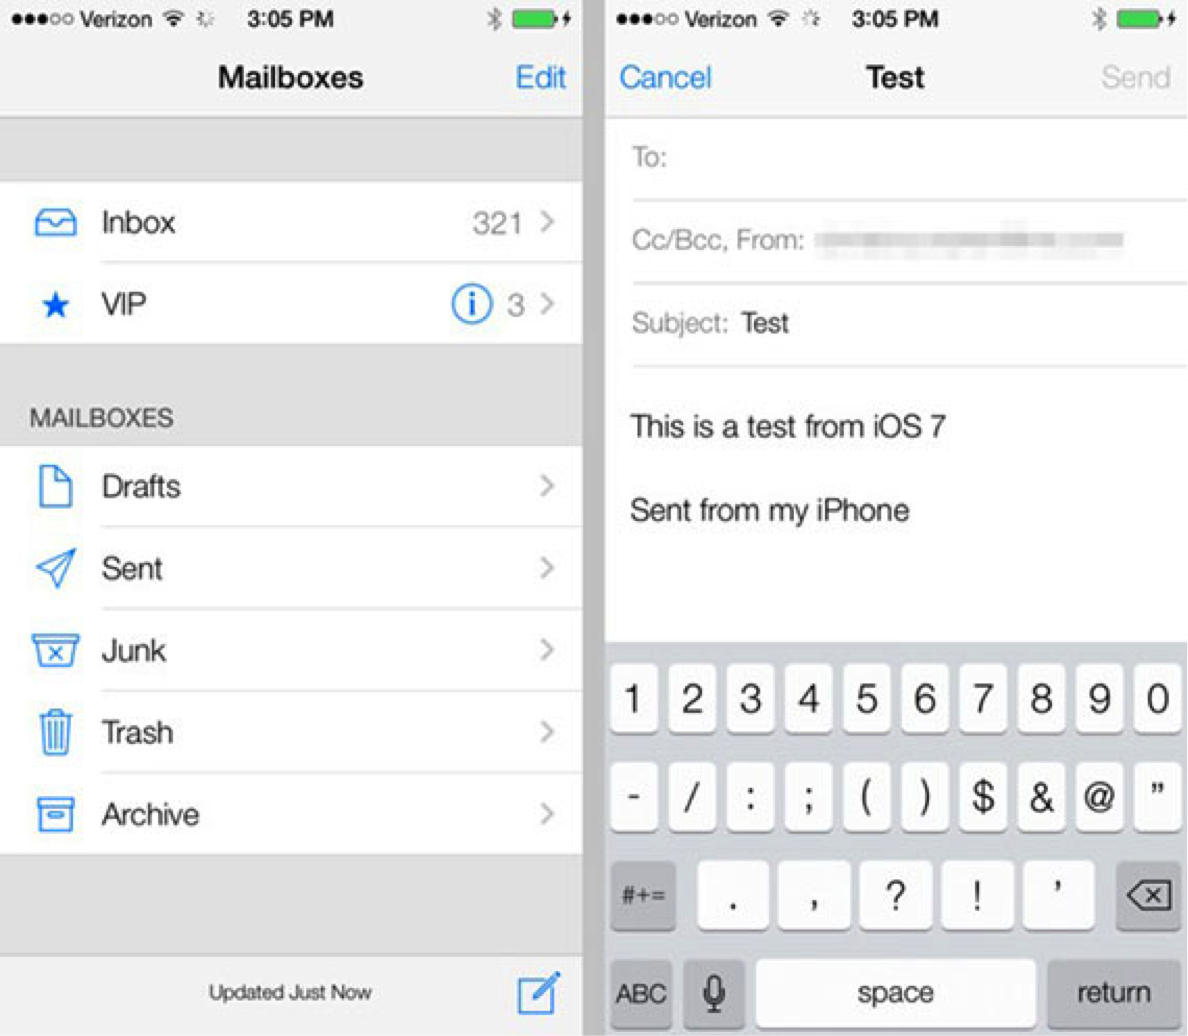 The mailbox in the iOS7 beta for iPhone